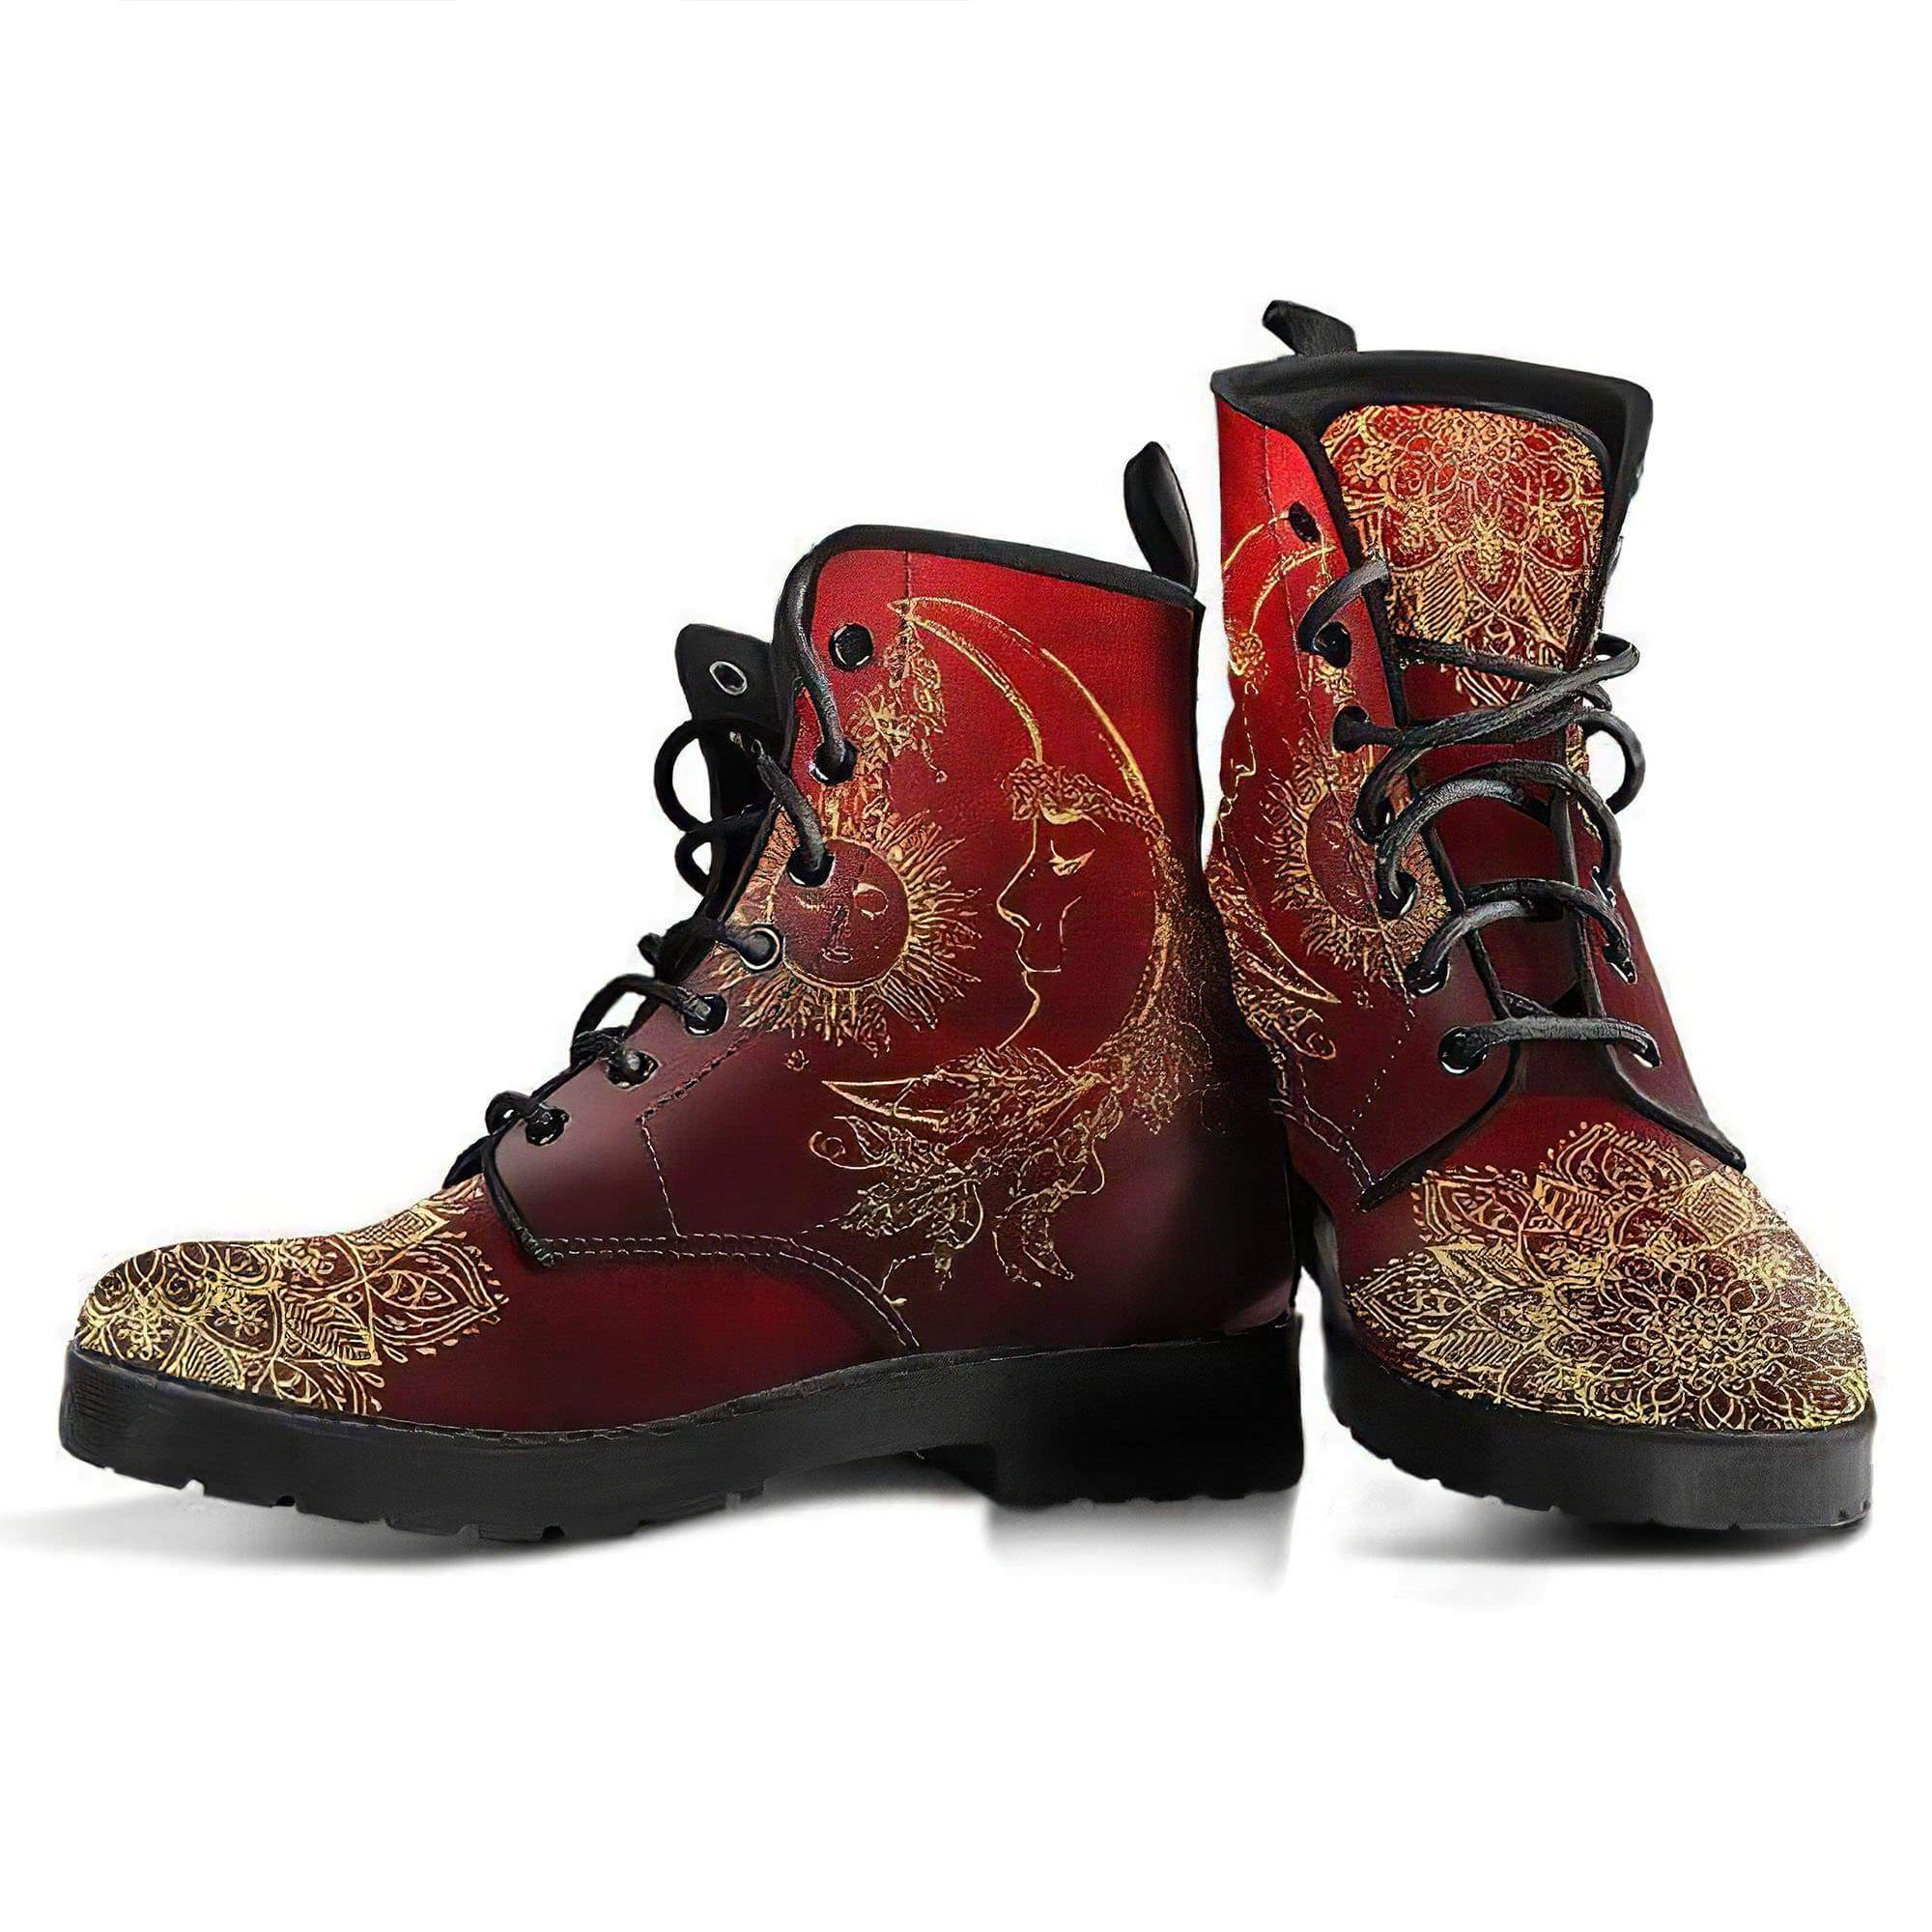 red-sun-and-moon-handcrafted-boots-women-s-leather-boots-12051945095229.jpg